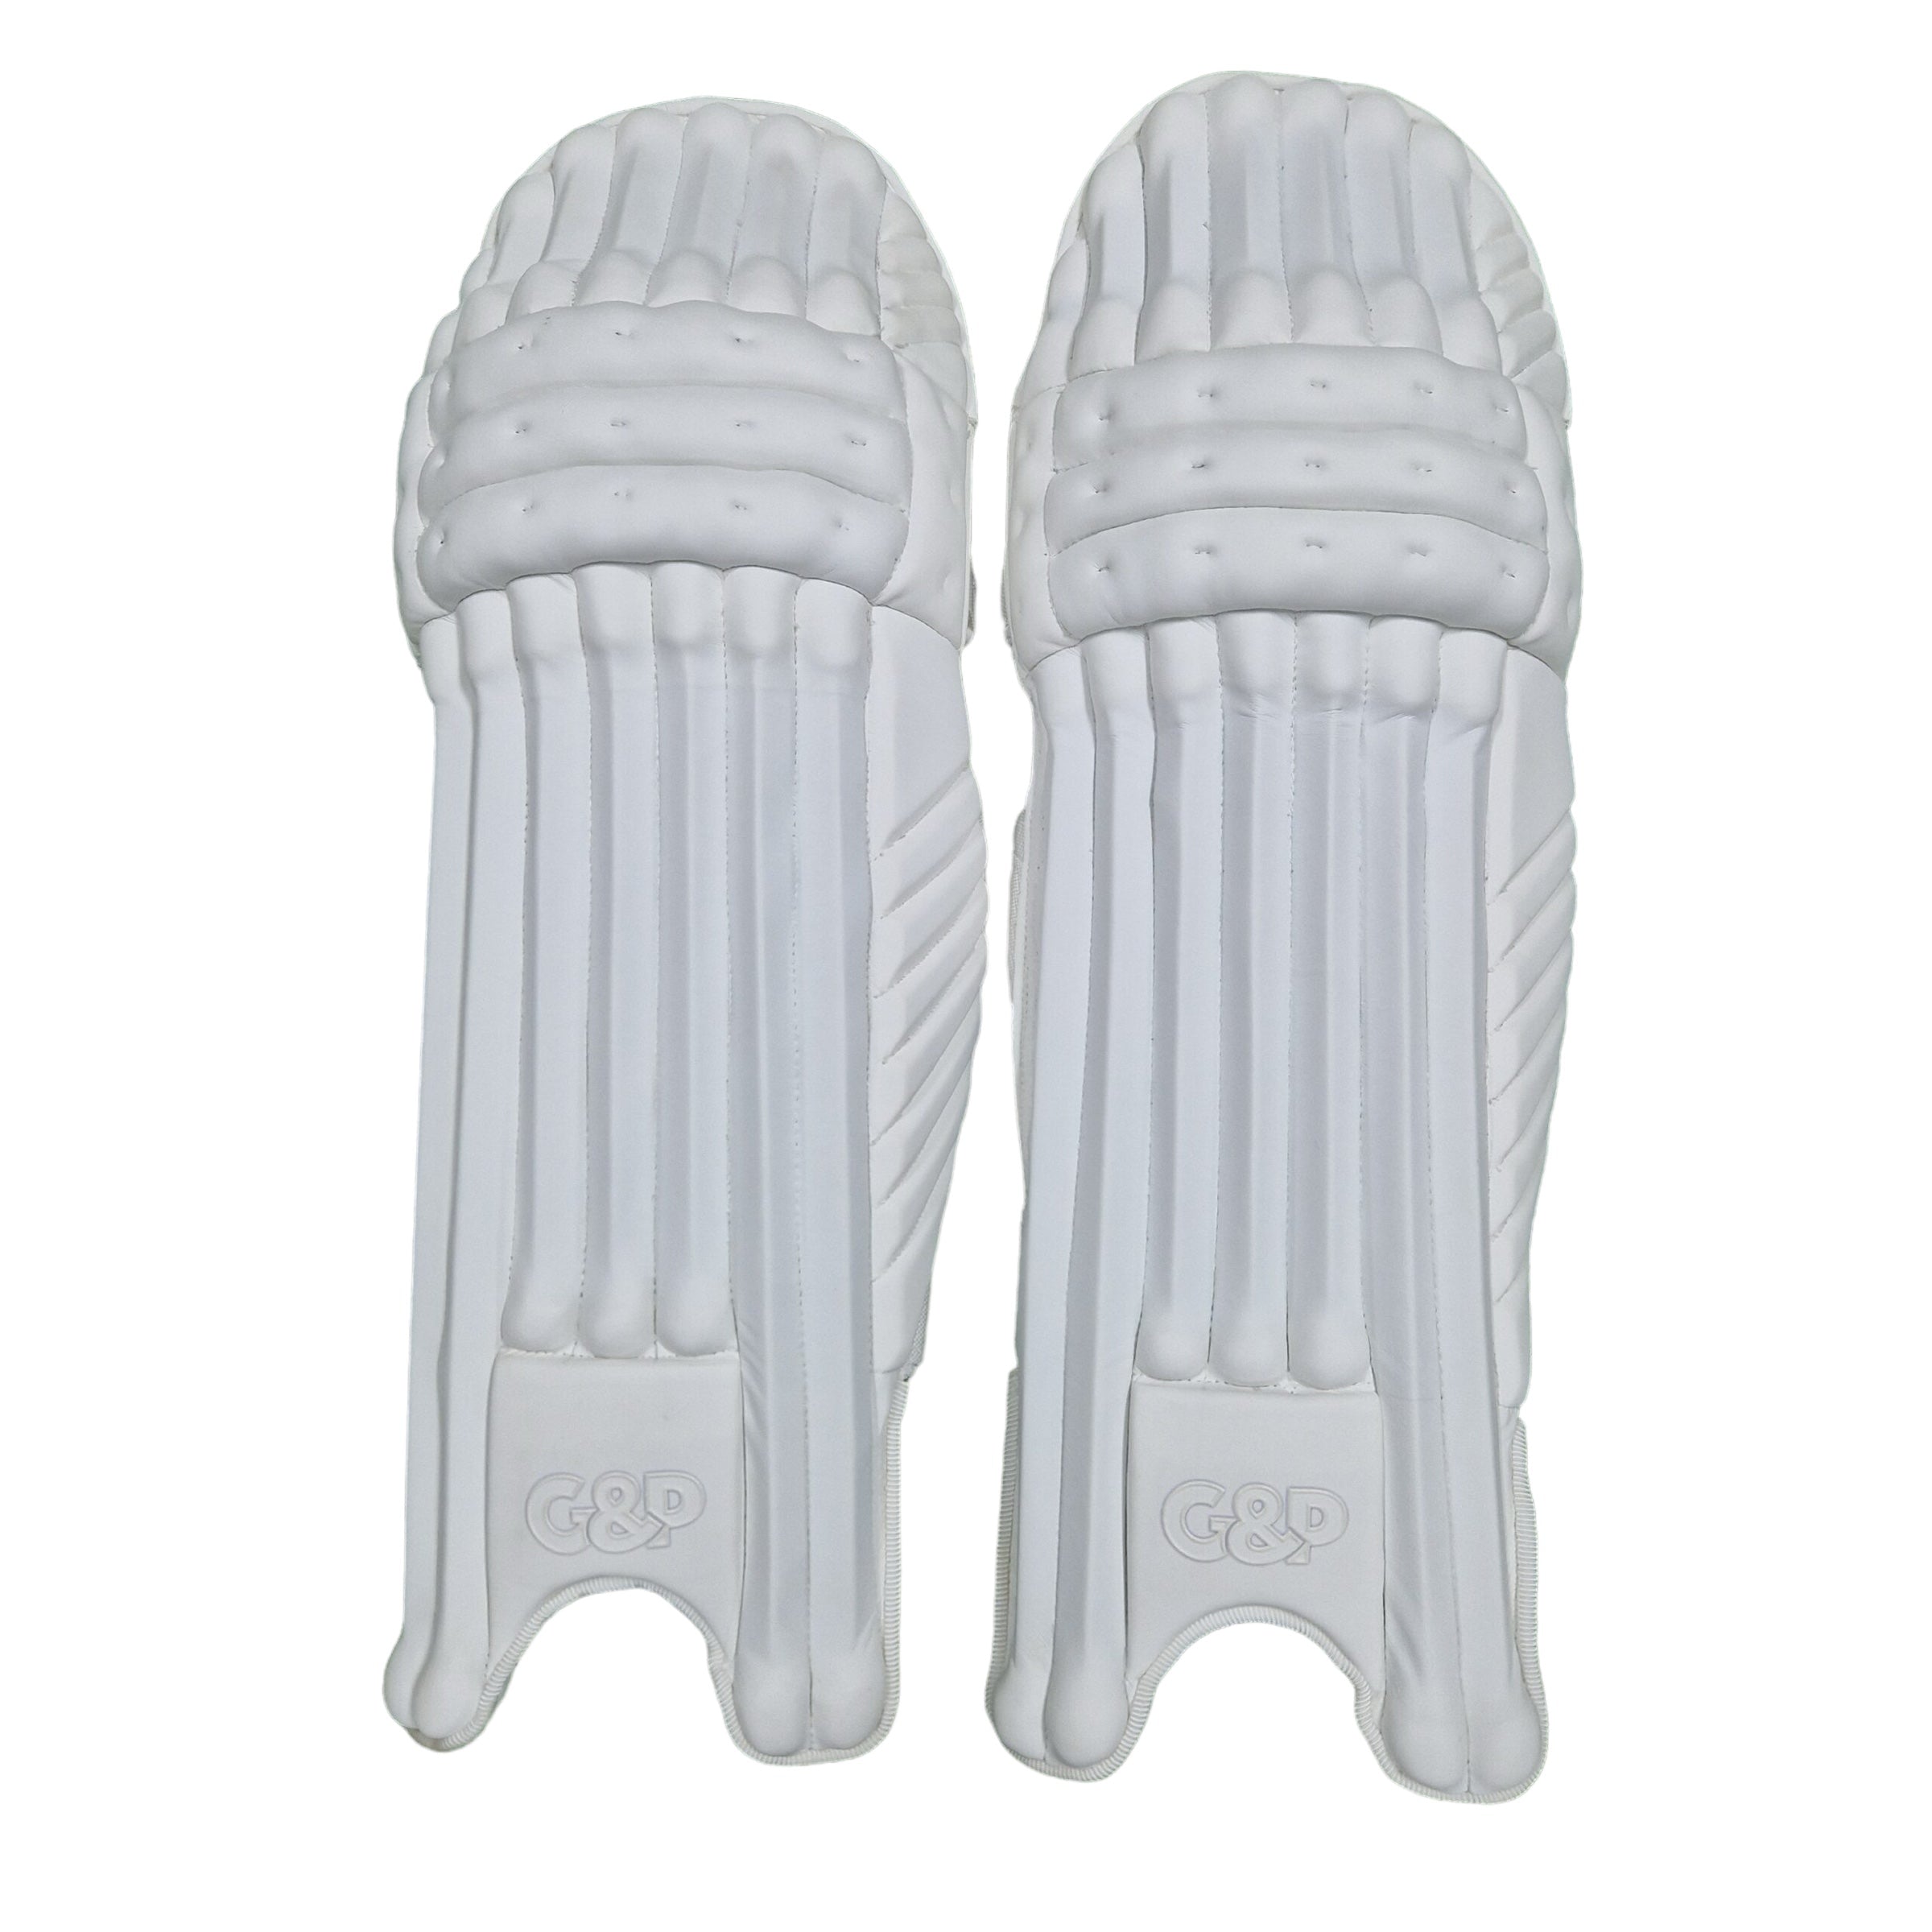 Gentlemen & Players Traditional Batting Pads - The Cricket Store